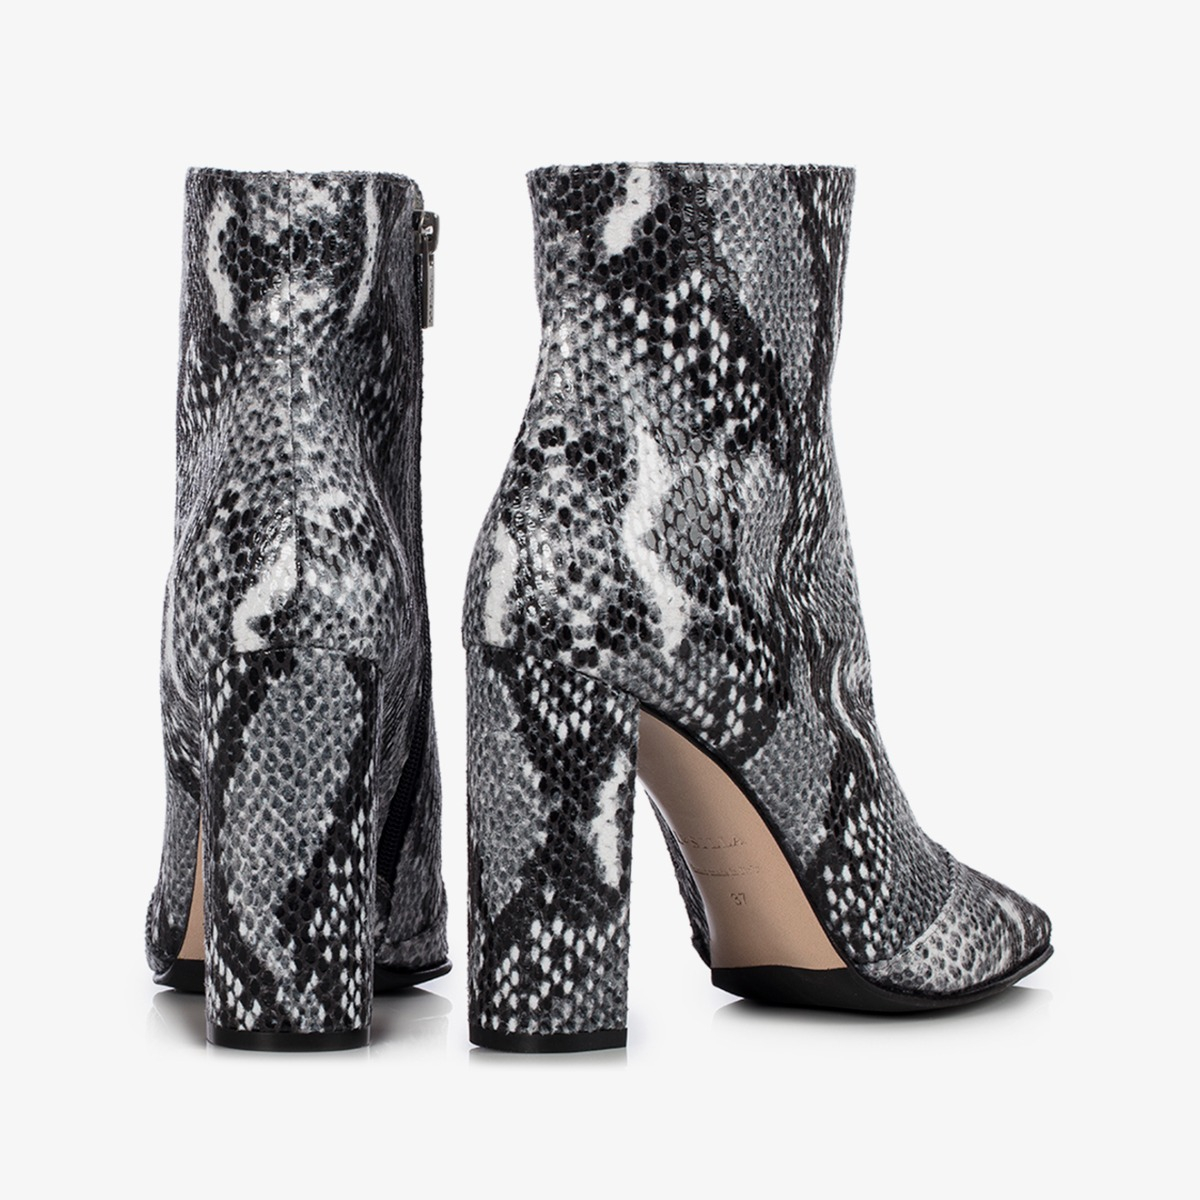 MEGAN ANKLE BOOT 100 mm - Le Silla official outlet